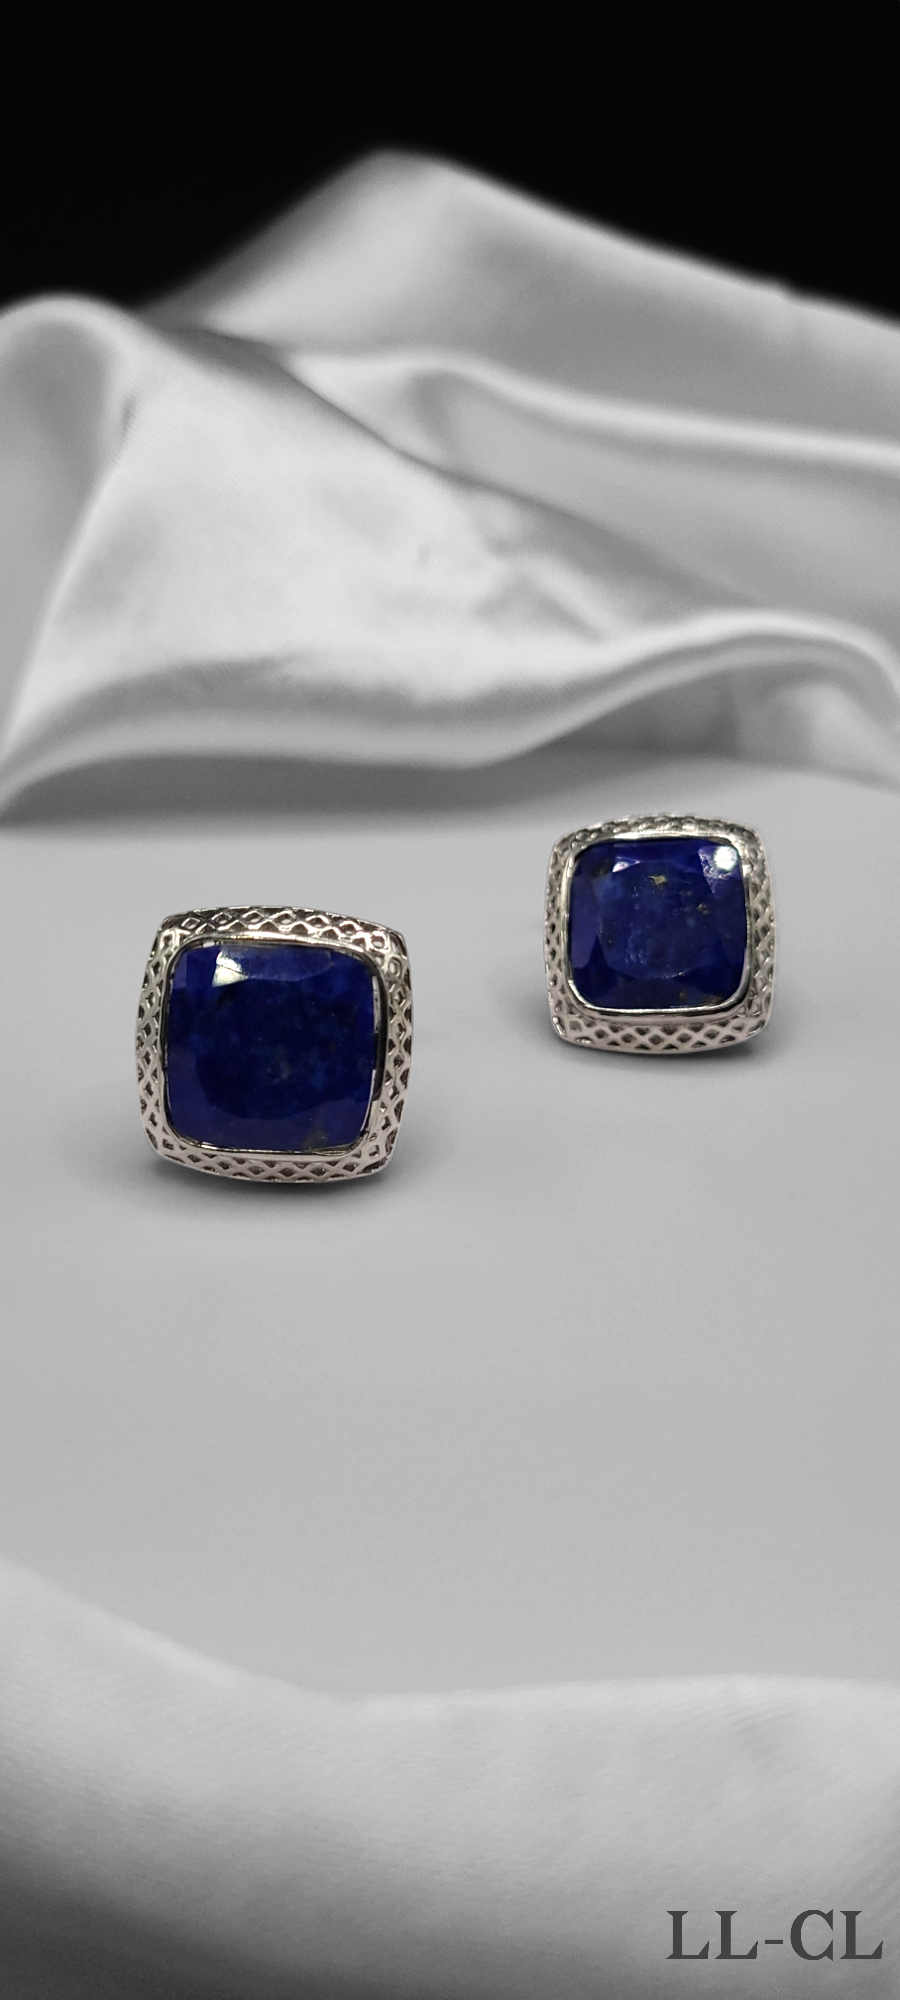 LAPIS LAZILI STONE CUFF LINKS ON STERLING SILVER. ONE OF A KIND! CELEBRATED AS BEING THE WISDOM STONE